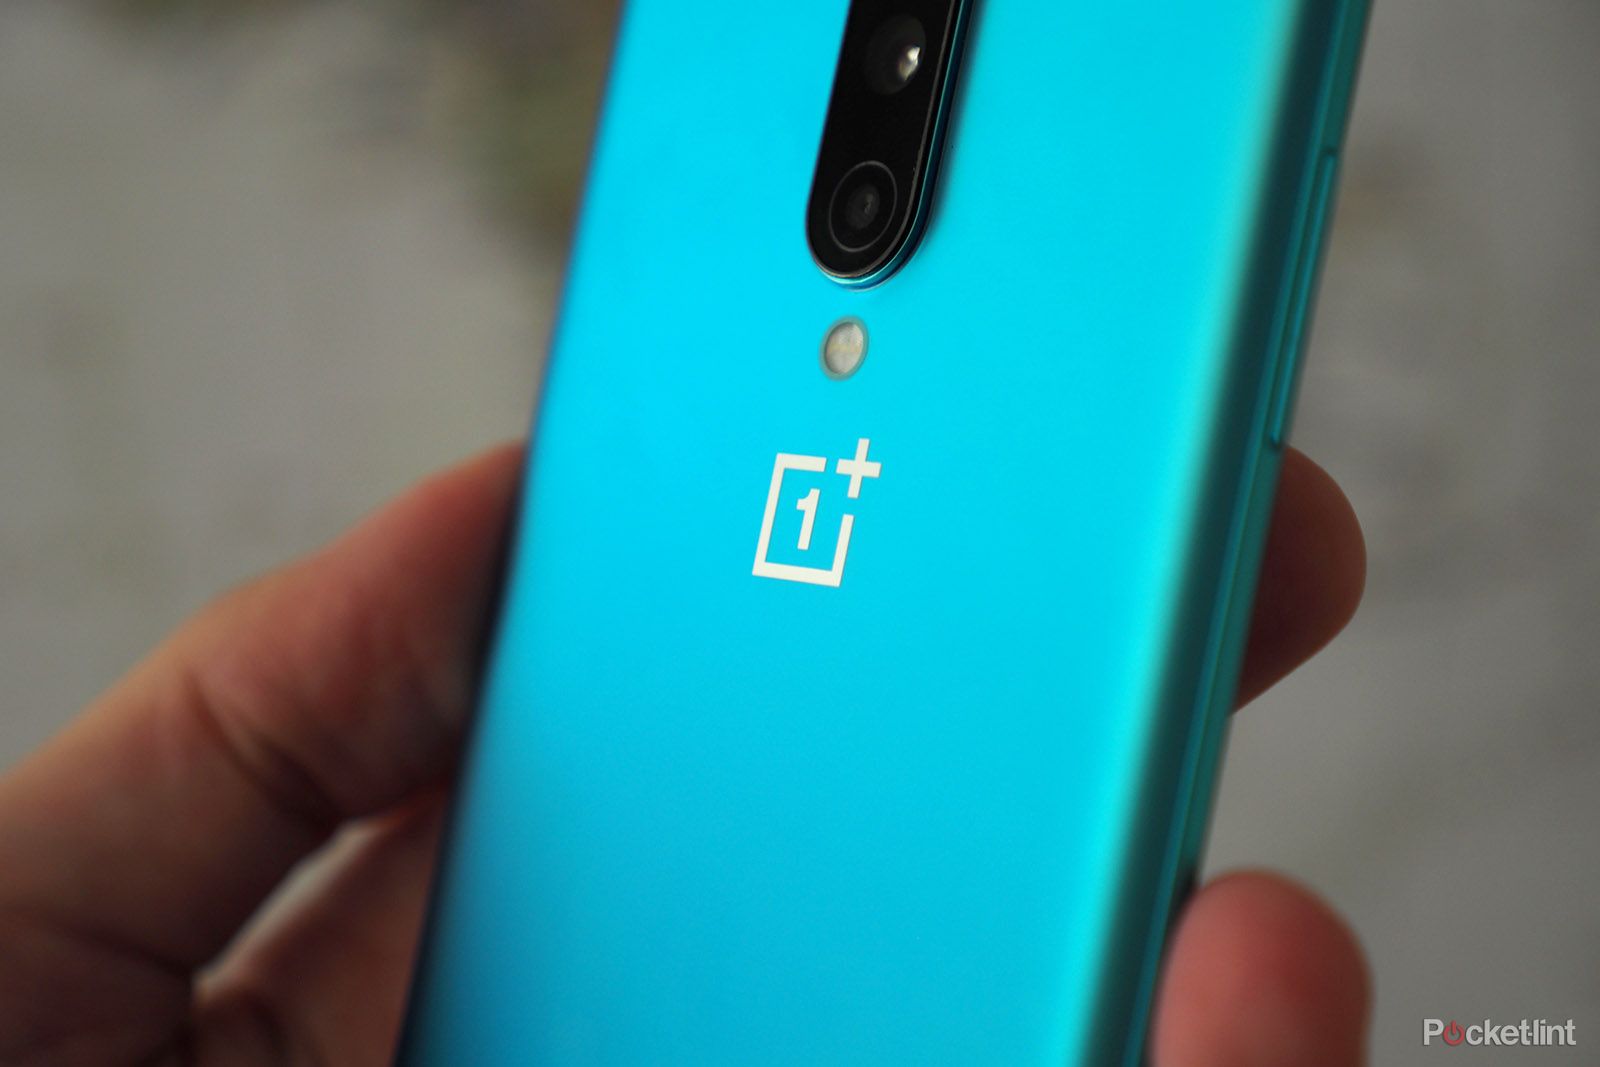 OnePlus CEO announces there will be a third, less-expensive phone called the OnePlus 9R photo 2